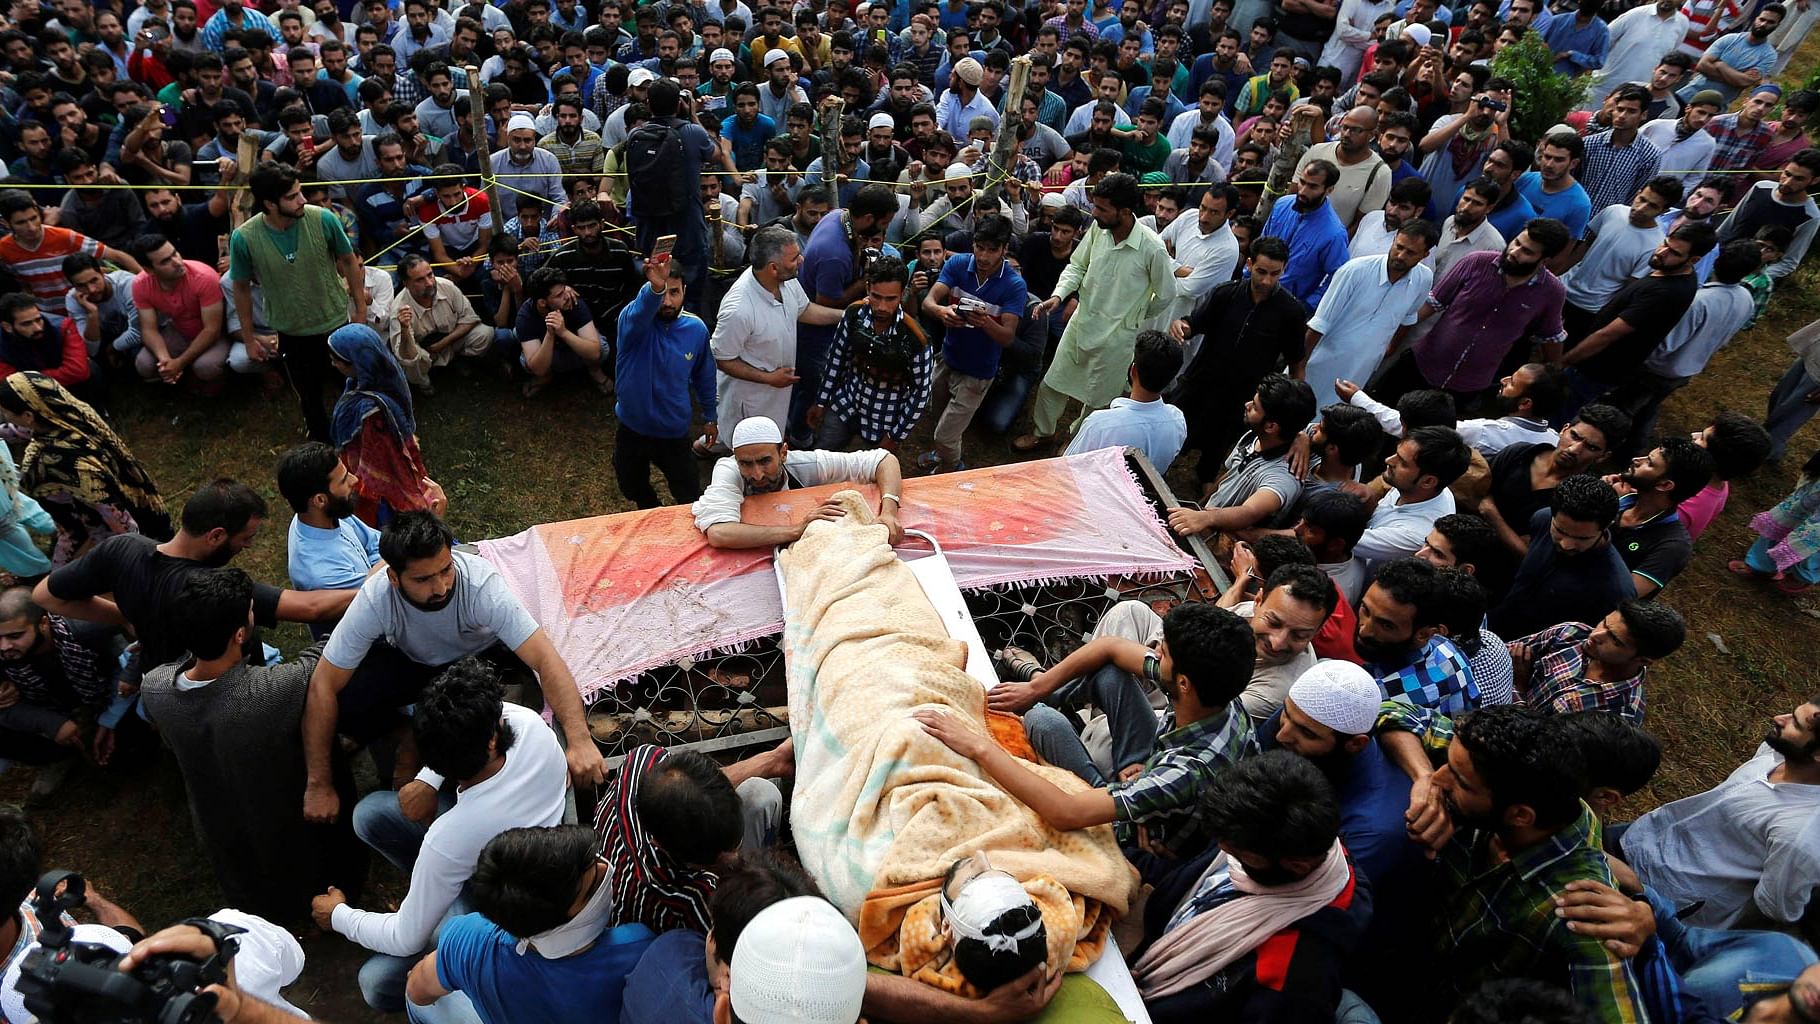 

People in Kashmir joined the funeral of Burhan Wani by defying curfew restrictions. (Photo: Reuters)